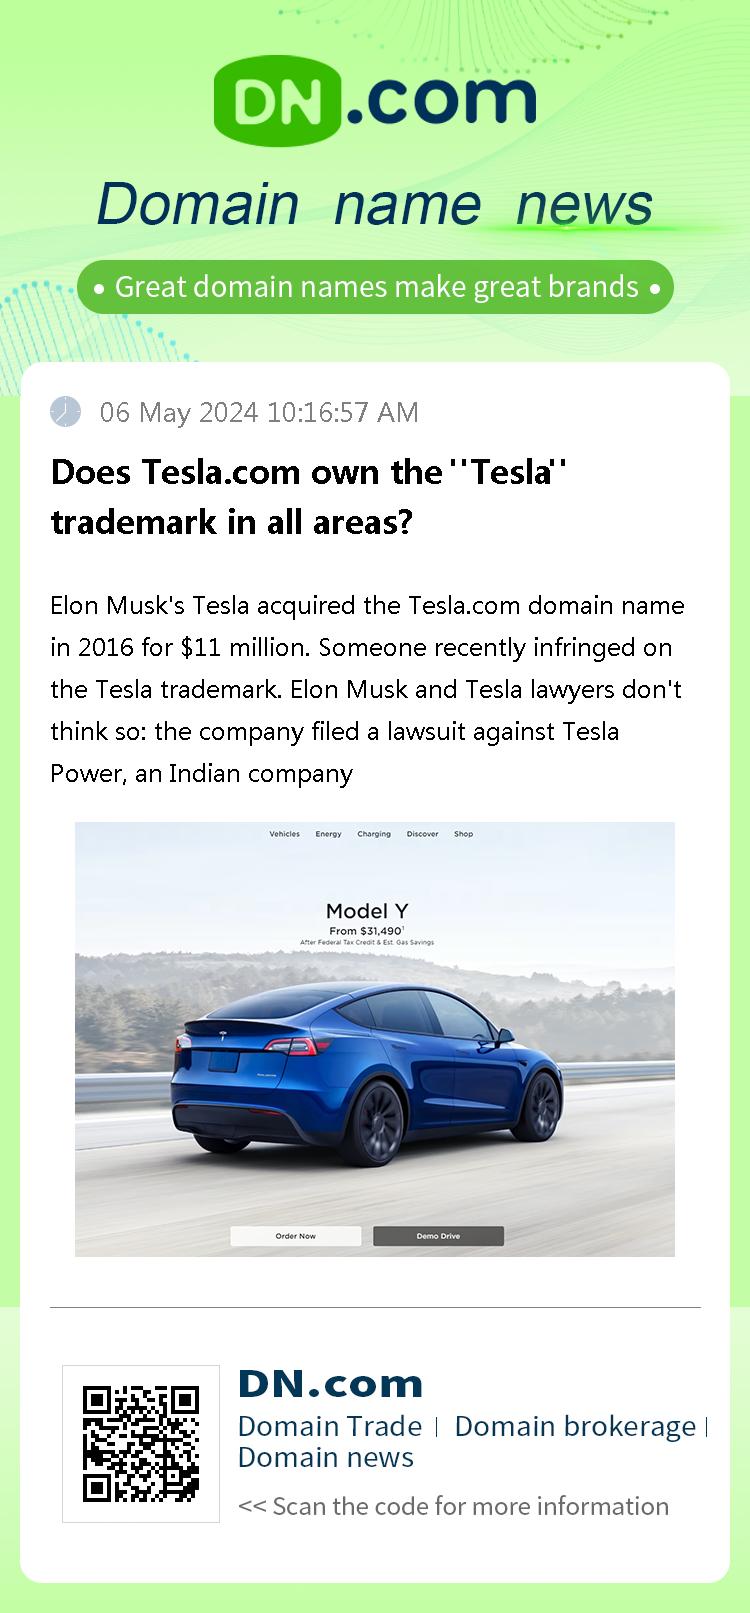 Does Tesla.com own the 